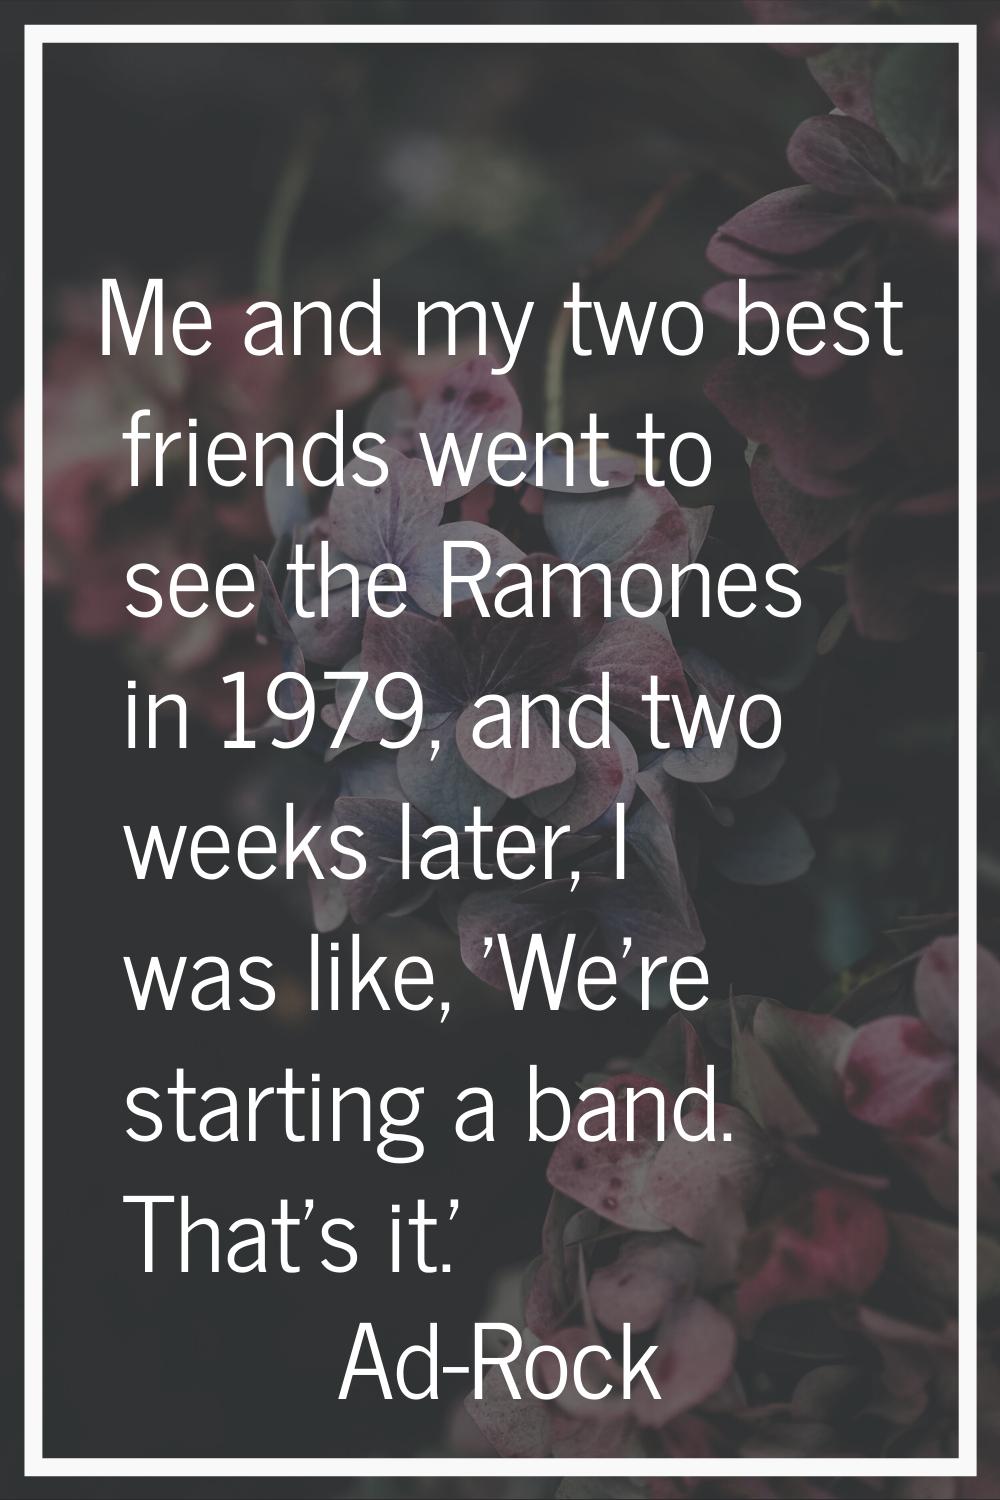 Me and my two best friends went to see the Ramones in 1979, and two weeks later, I was like, 'We're